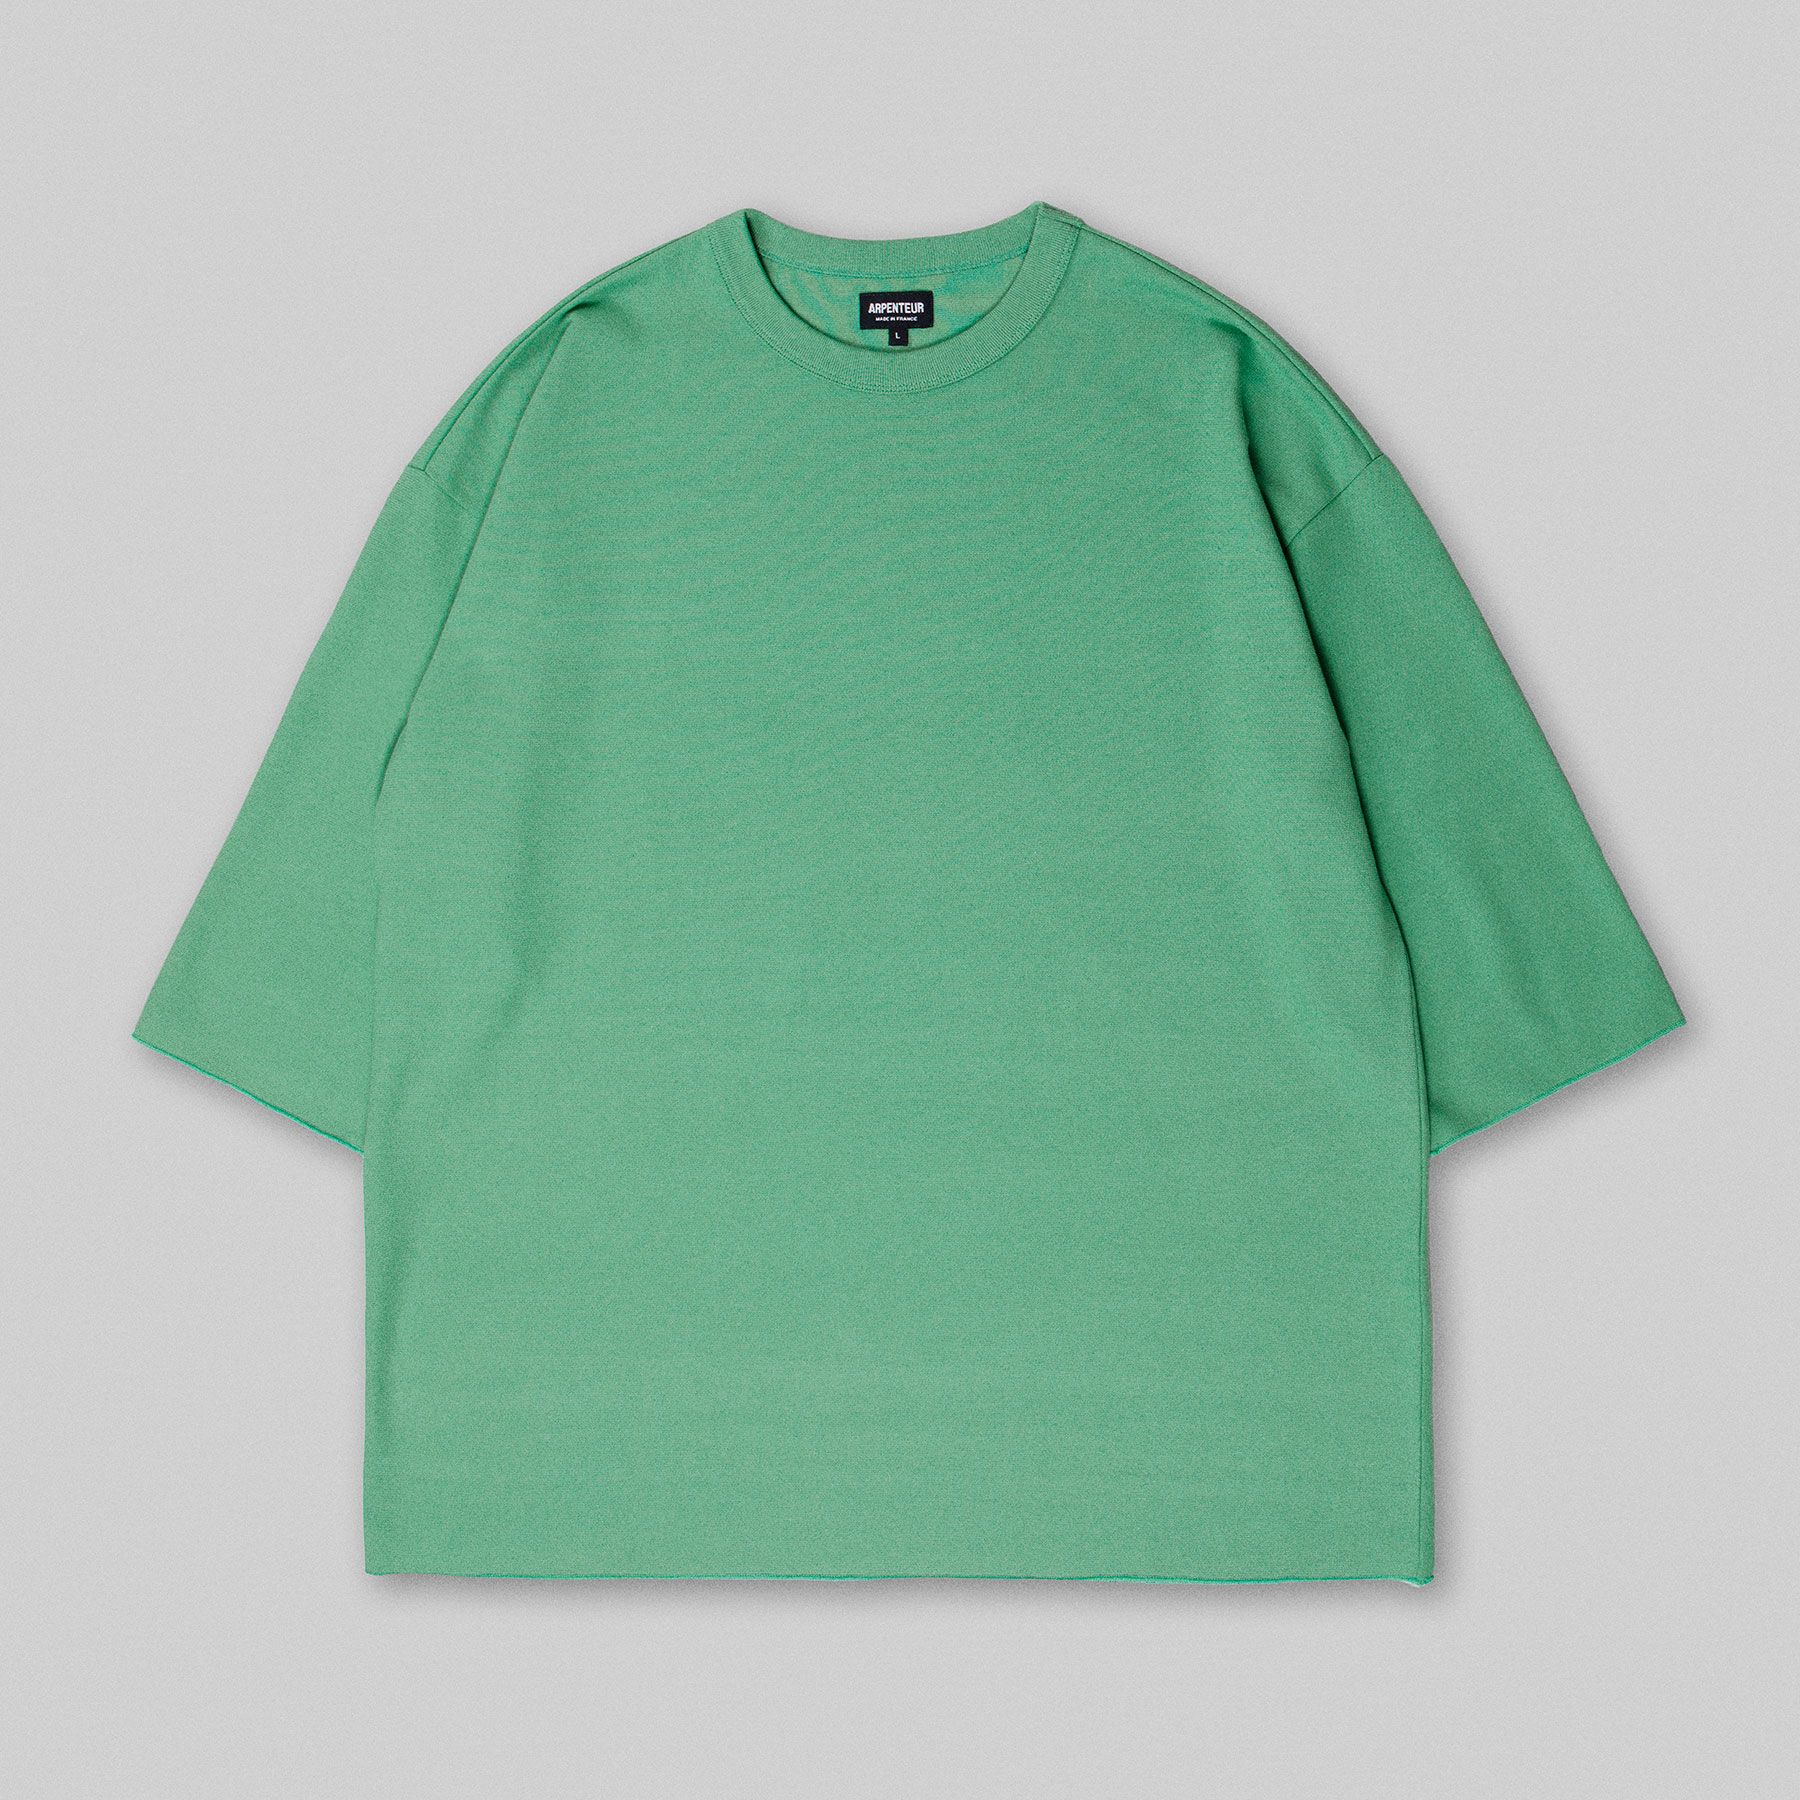 MARINIERE t-shirt by Arpenteur in Leaf green color